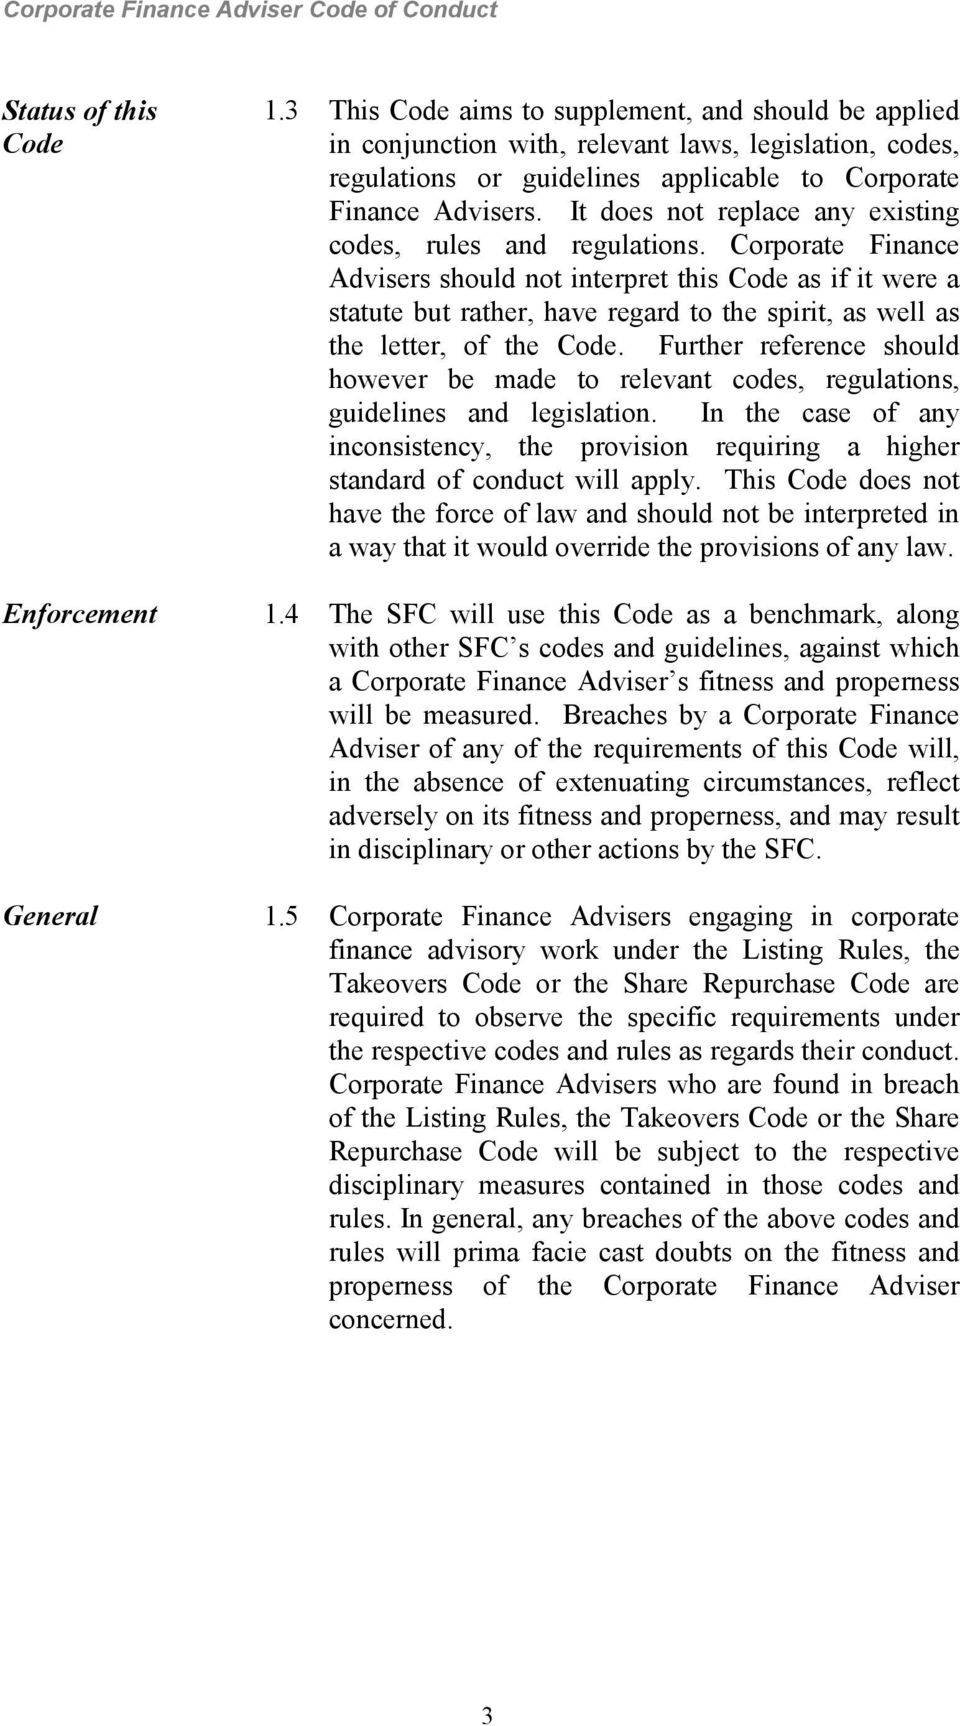 Corporate Finance Advisers should not interpret this Code as if it were a statute but rather, have regard to the spirit, as well as the letter, of the Code.